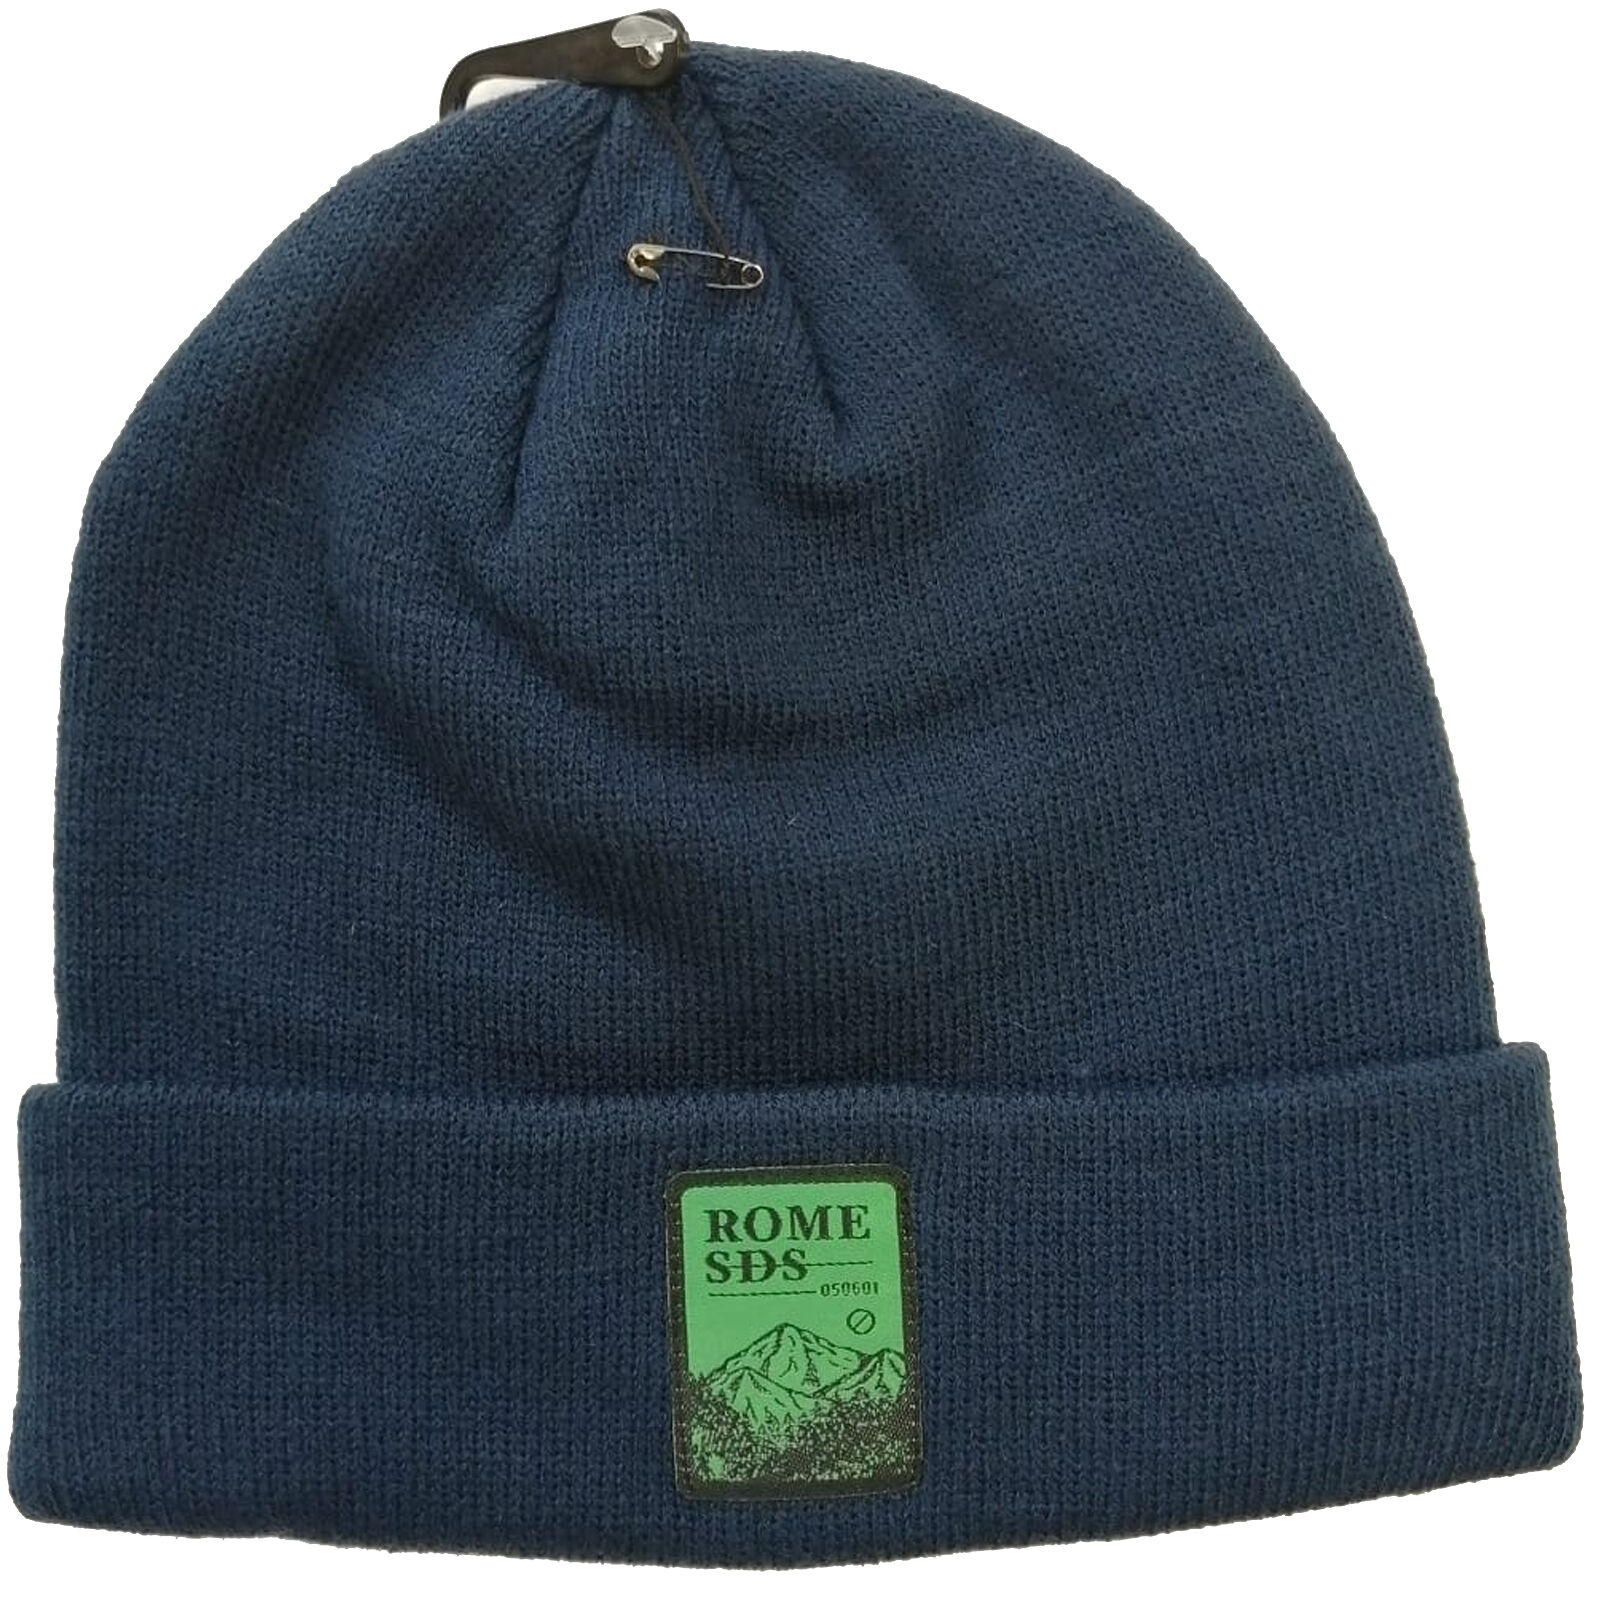 ROME MTNS SKELTER NAVY One Size  - NAVY - Size: One Size - unisex